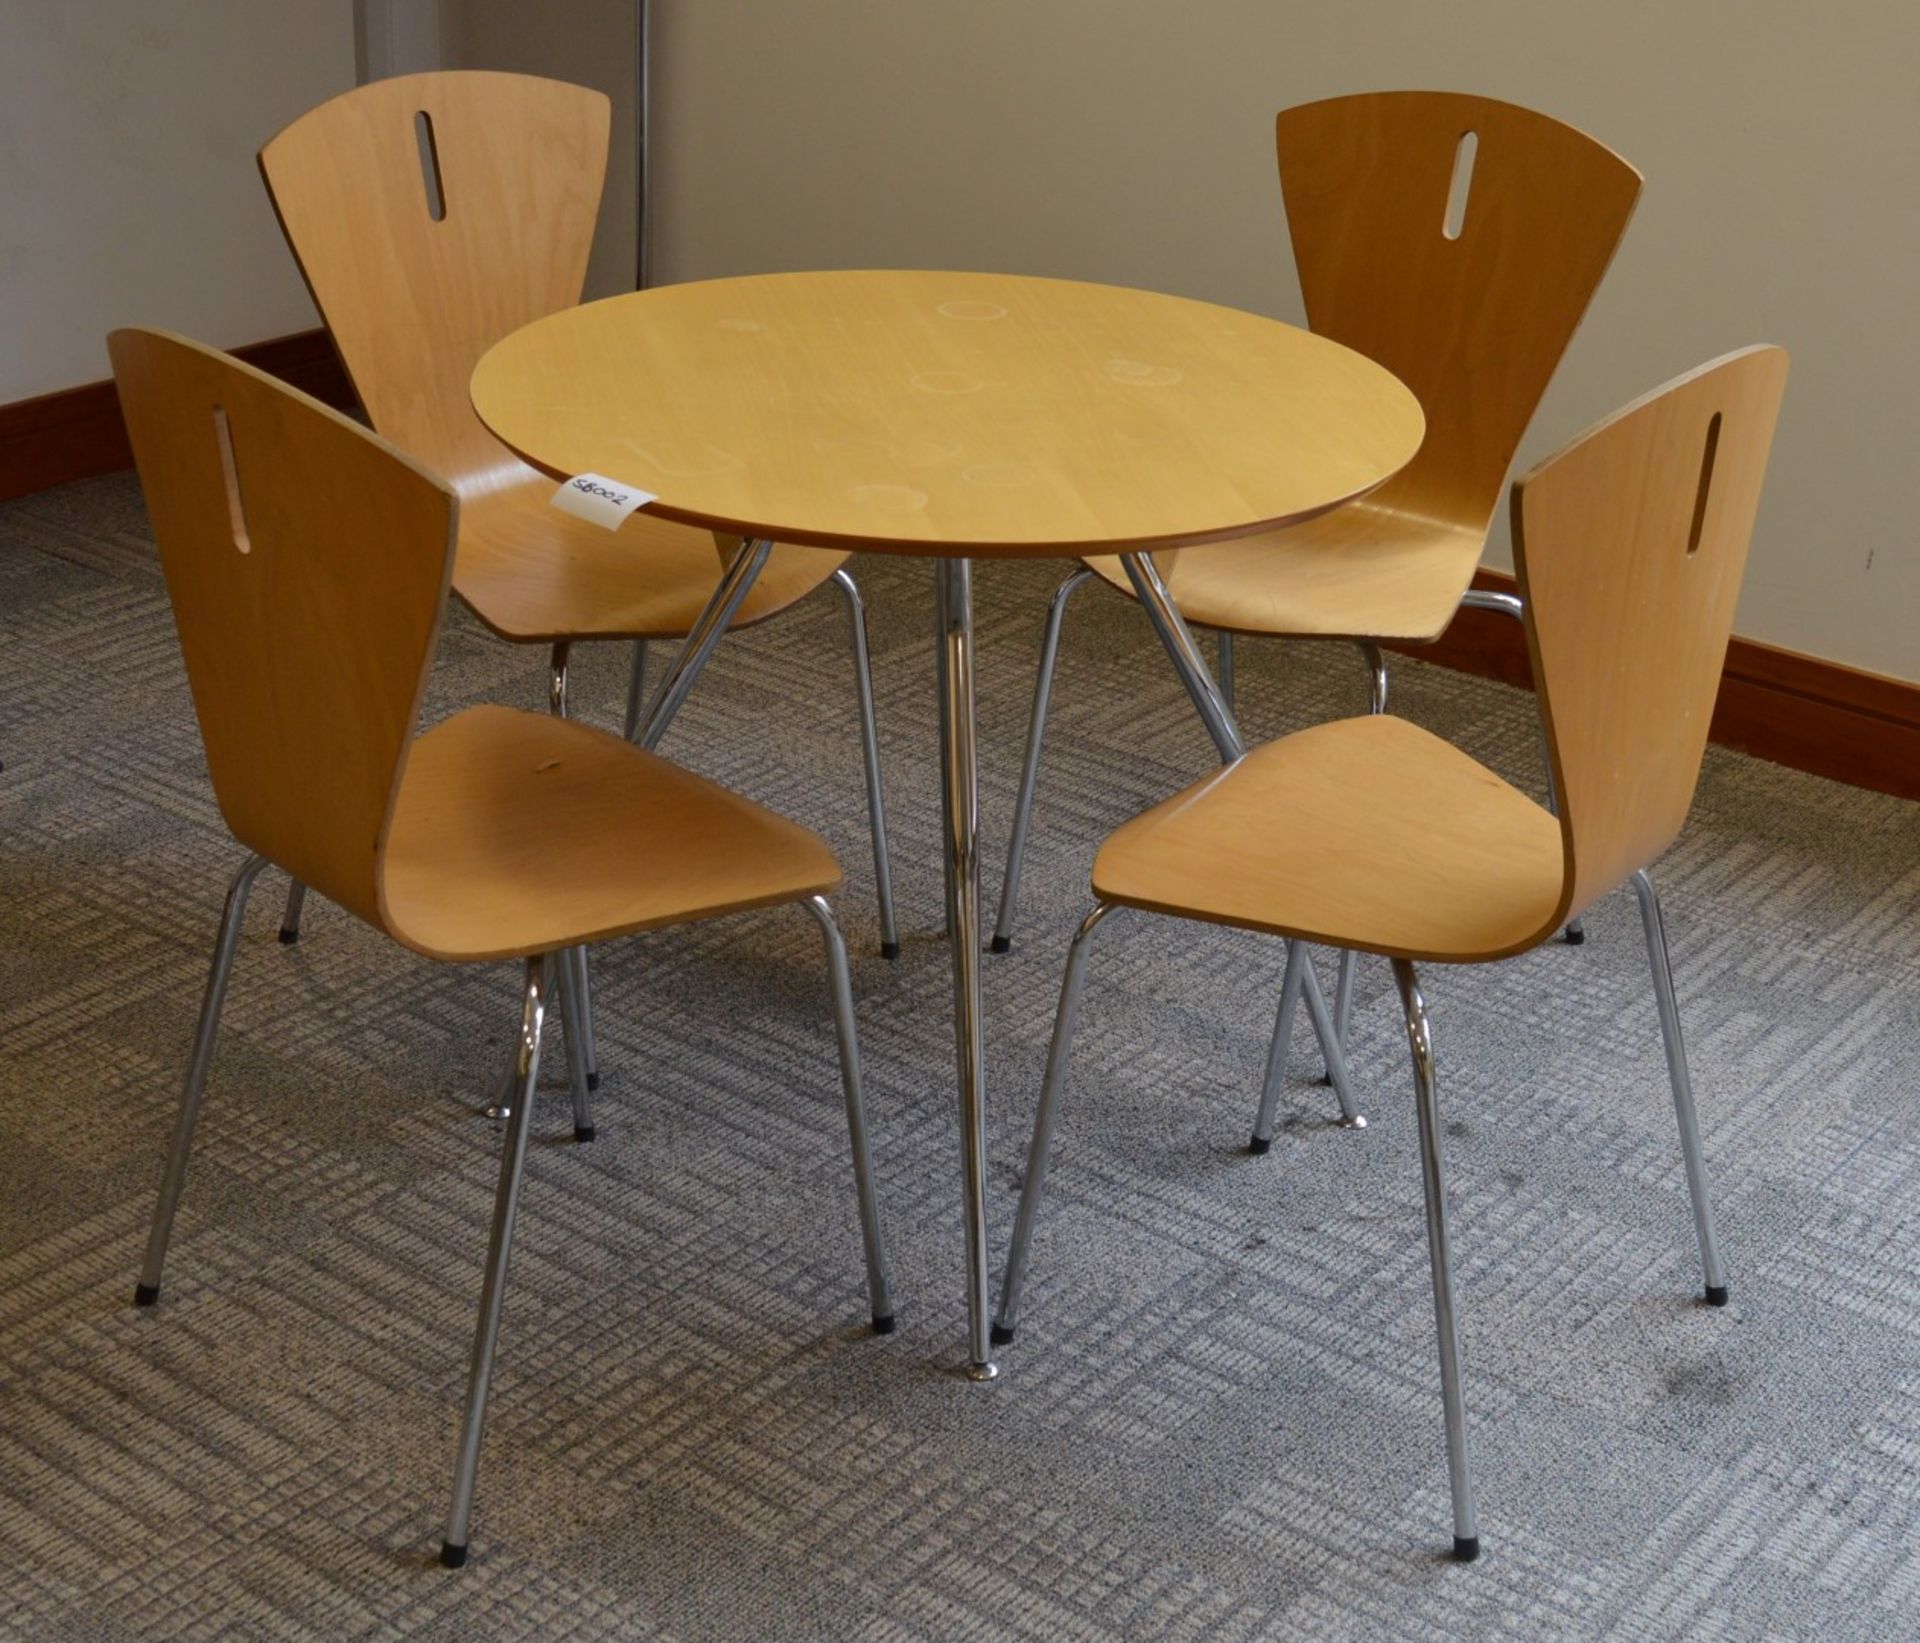 1 x Staff Room Table With Four Matching Chairs - Beech Finish - Contemporay Design - Ref SB002 -